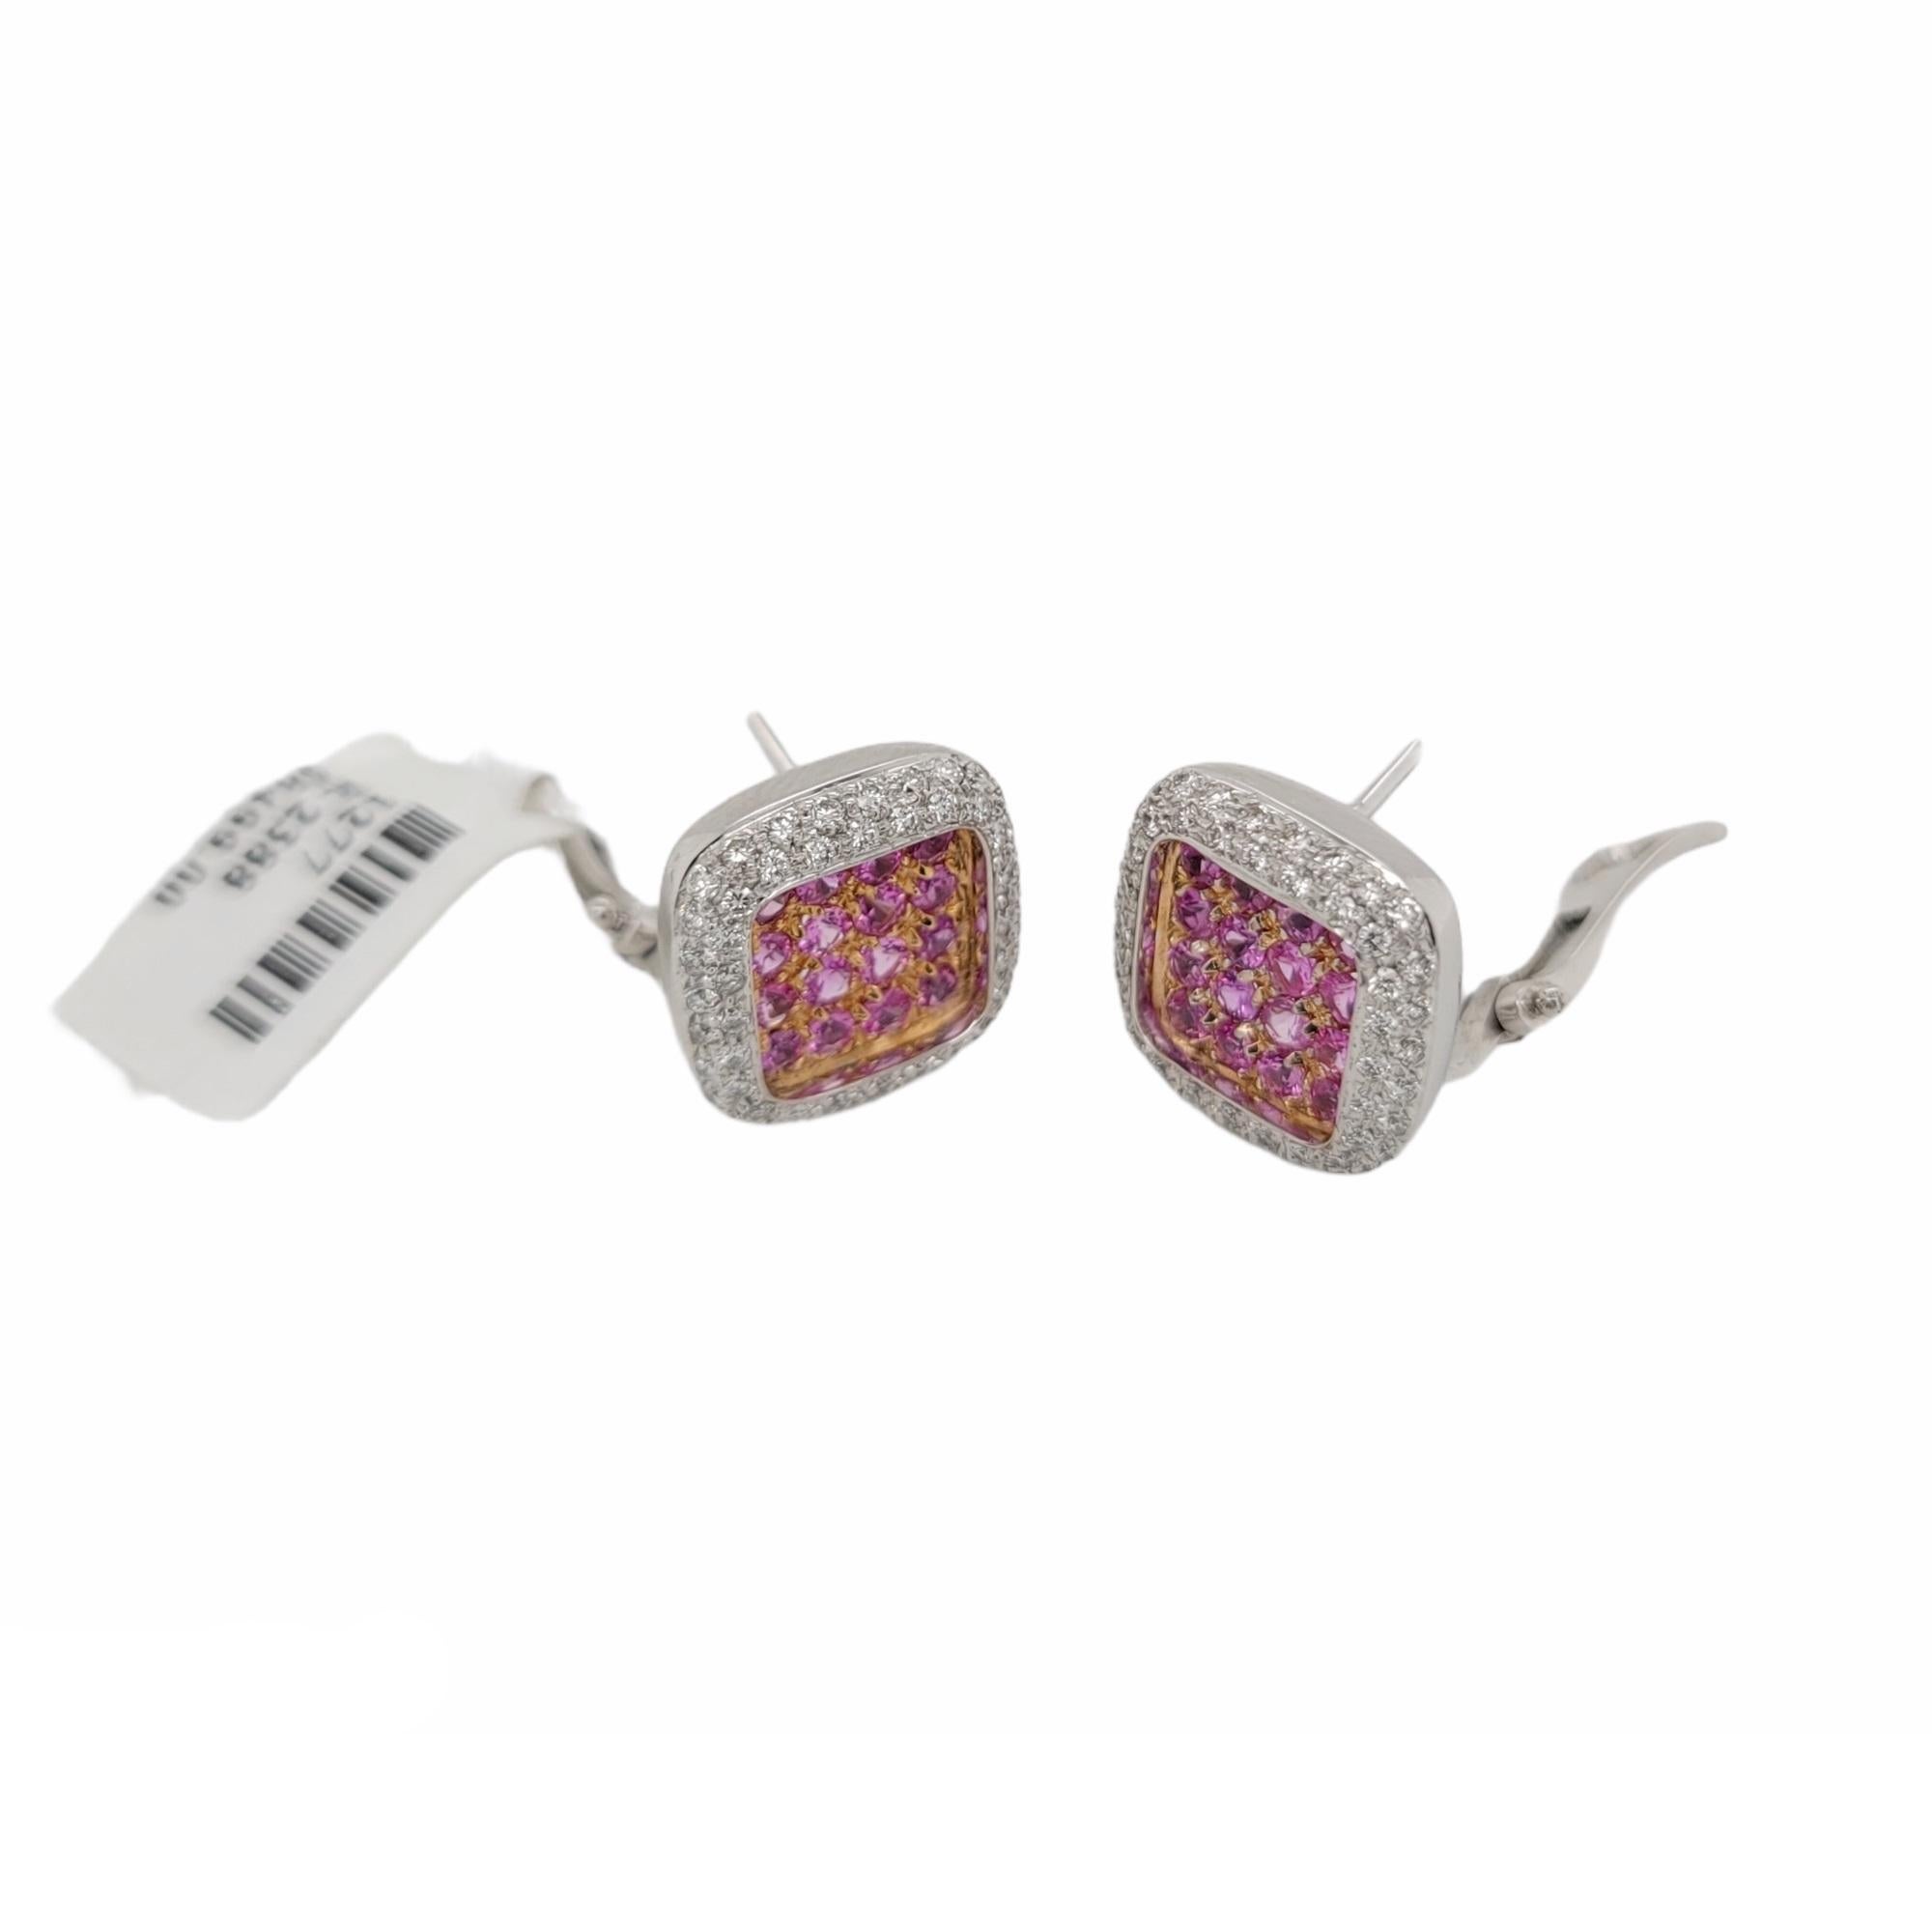 1.80 CT Natural Pink Sapphire & 1.68 CT Diamonds in 18K White Gold Earrings In Excellent Condition For Sale In Los Angeles, CA